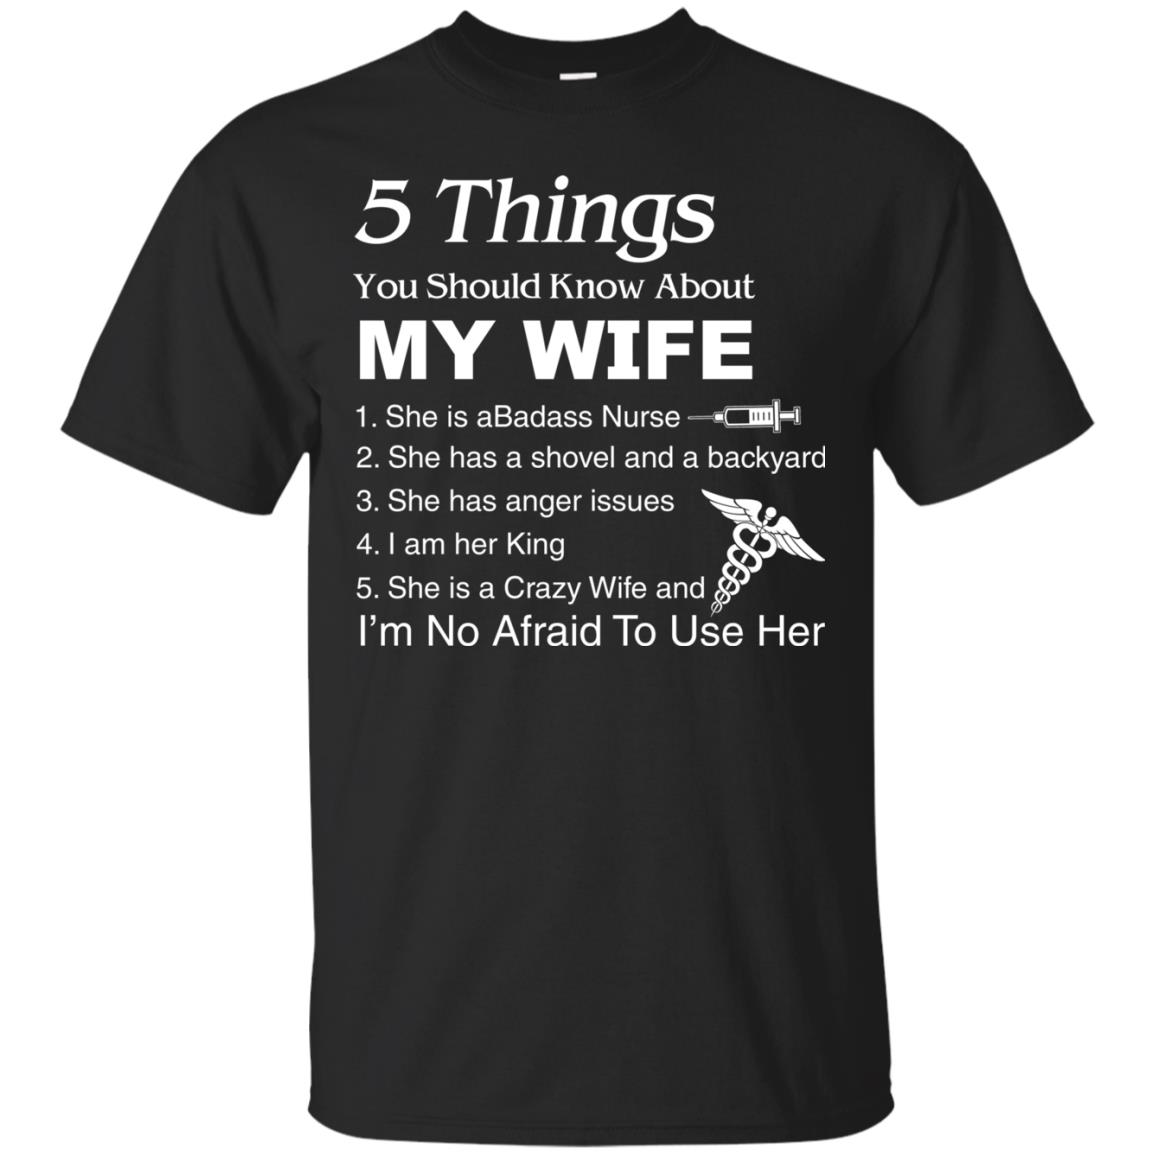 Nurse Shirt: 5 Things You Should Know About My Wife T-shirt